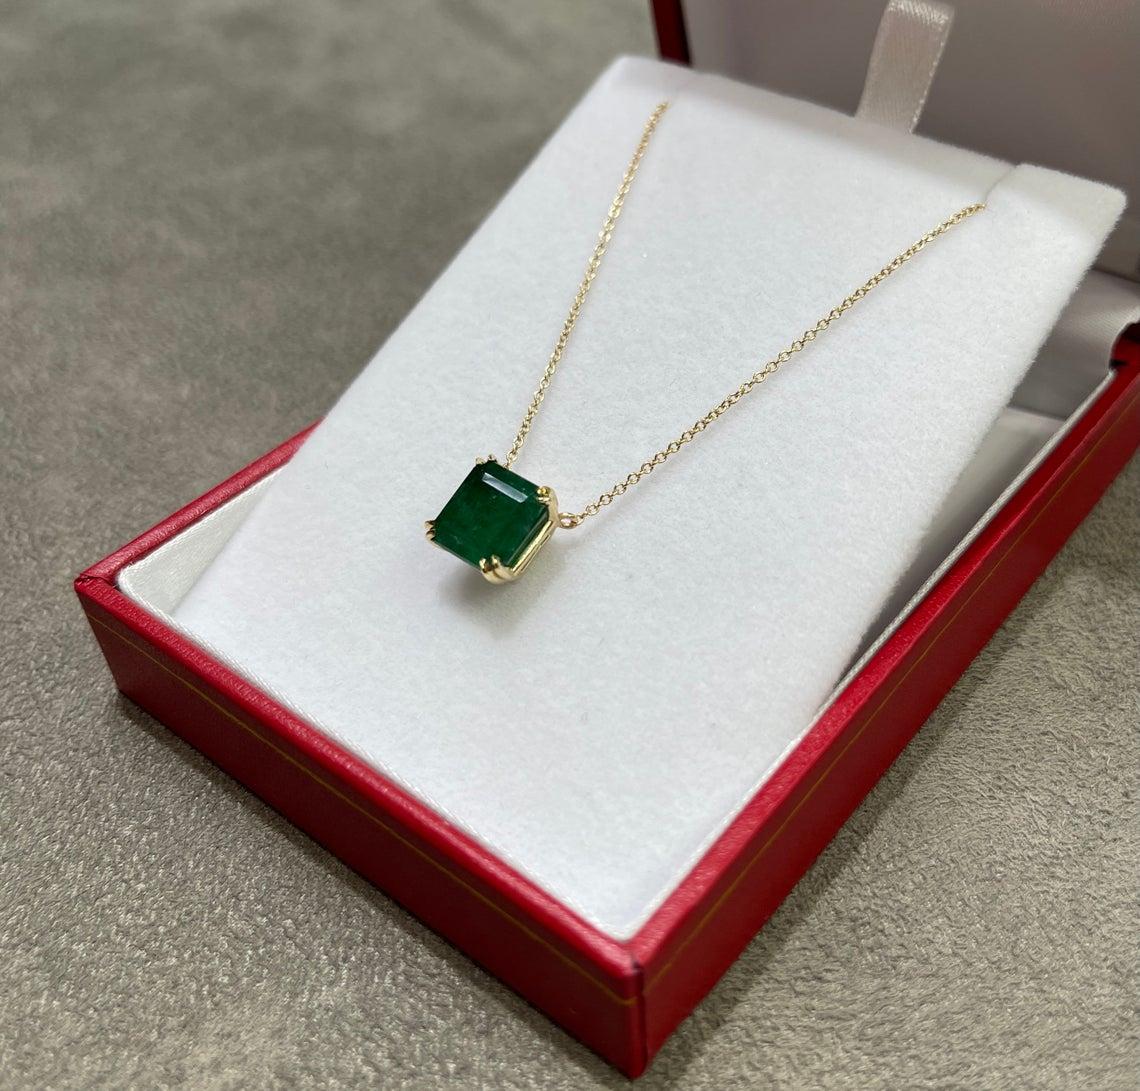 4.18ct 14K Emerald Solitaire Necklace, Emerald Cut Gold Necklace In New Condition For Sale In Jupiter, FL